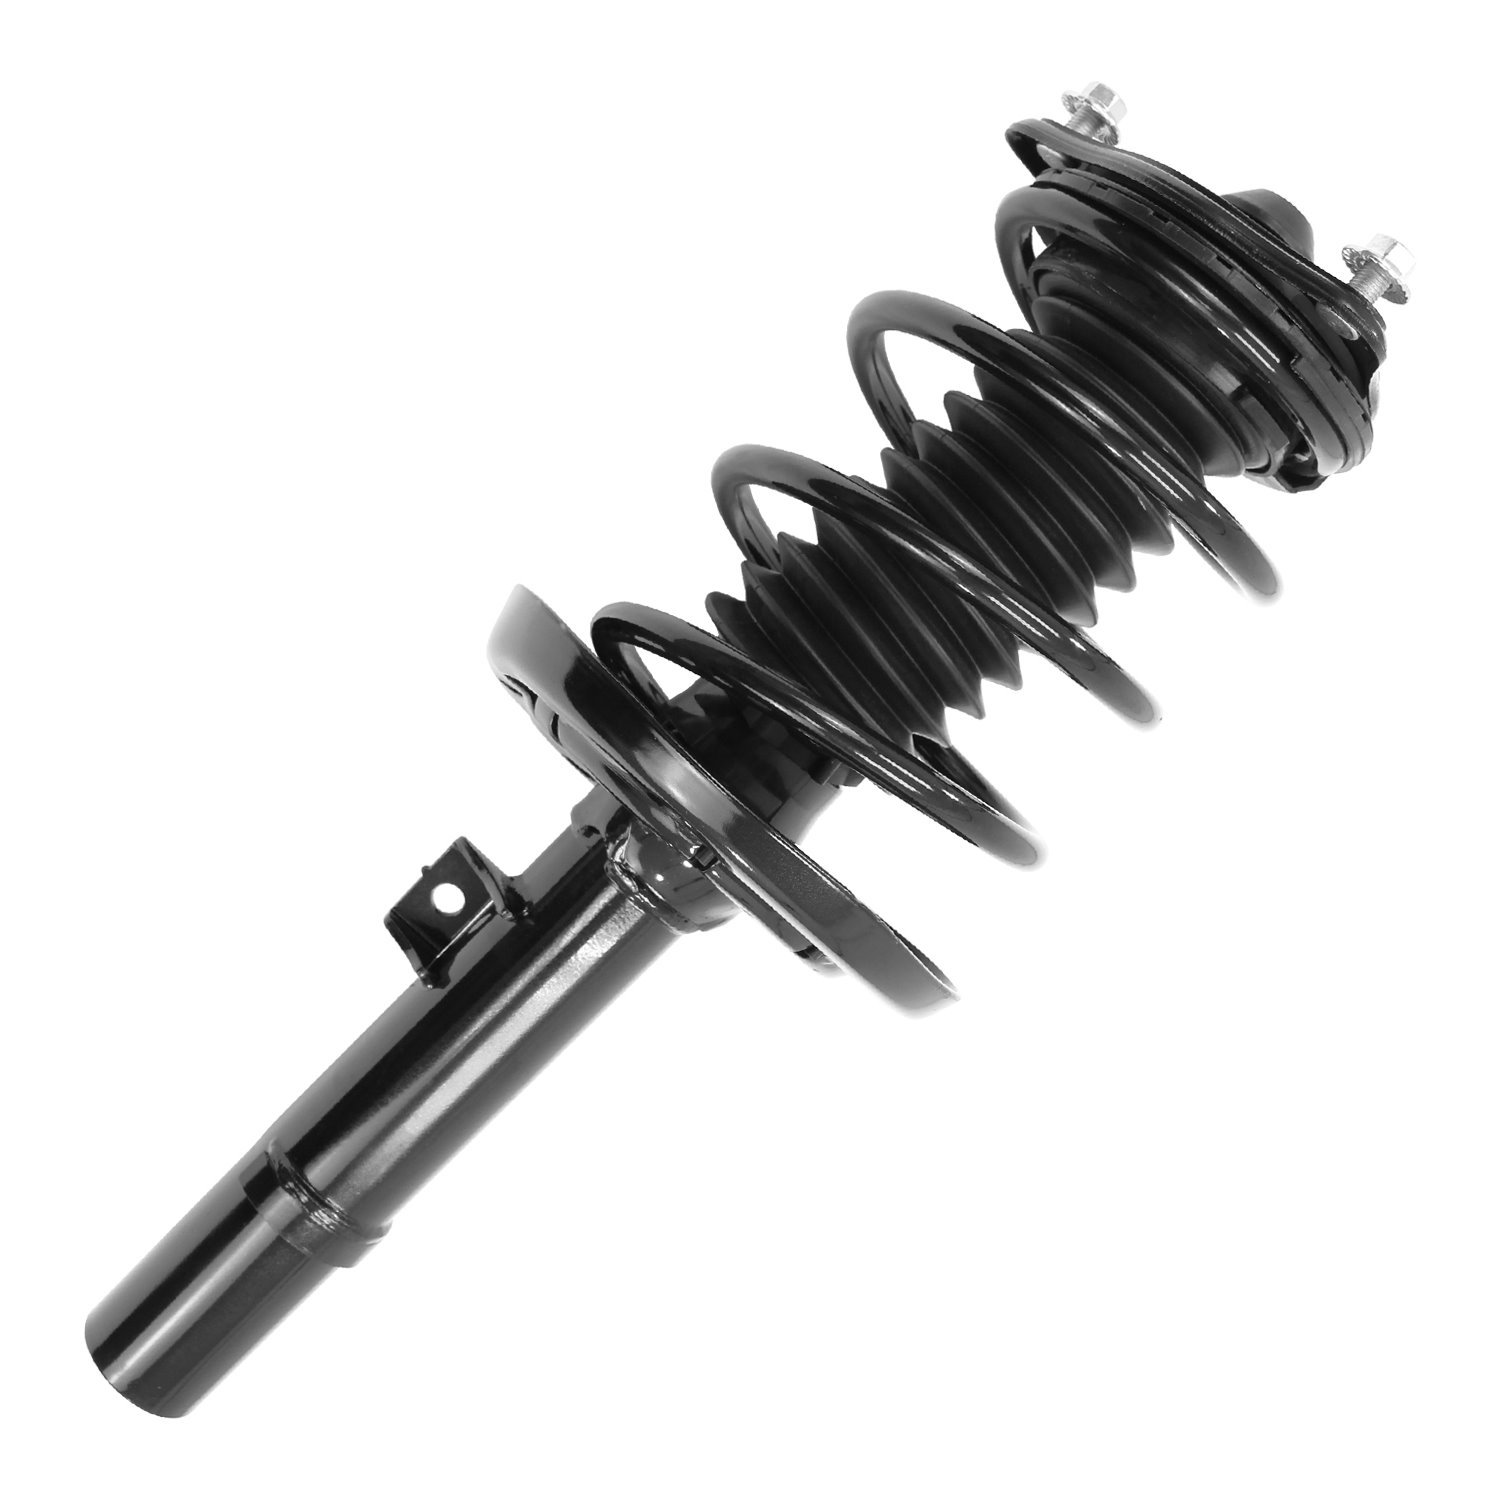 13571 Front Suspension Strut & Coil Spring Assemby Fits Select Honda Civic